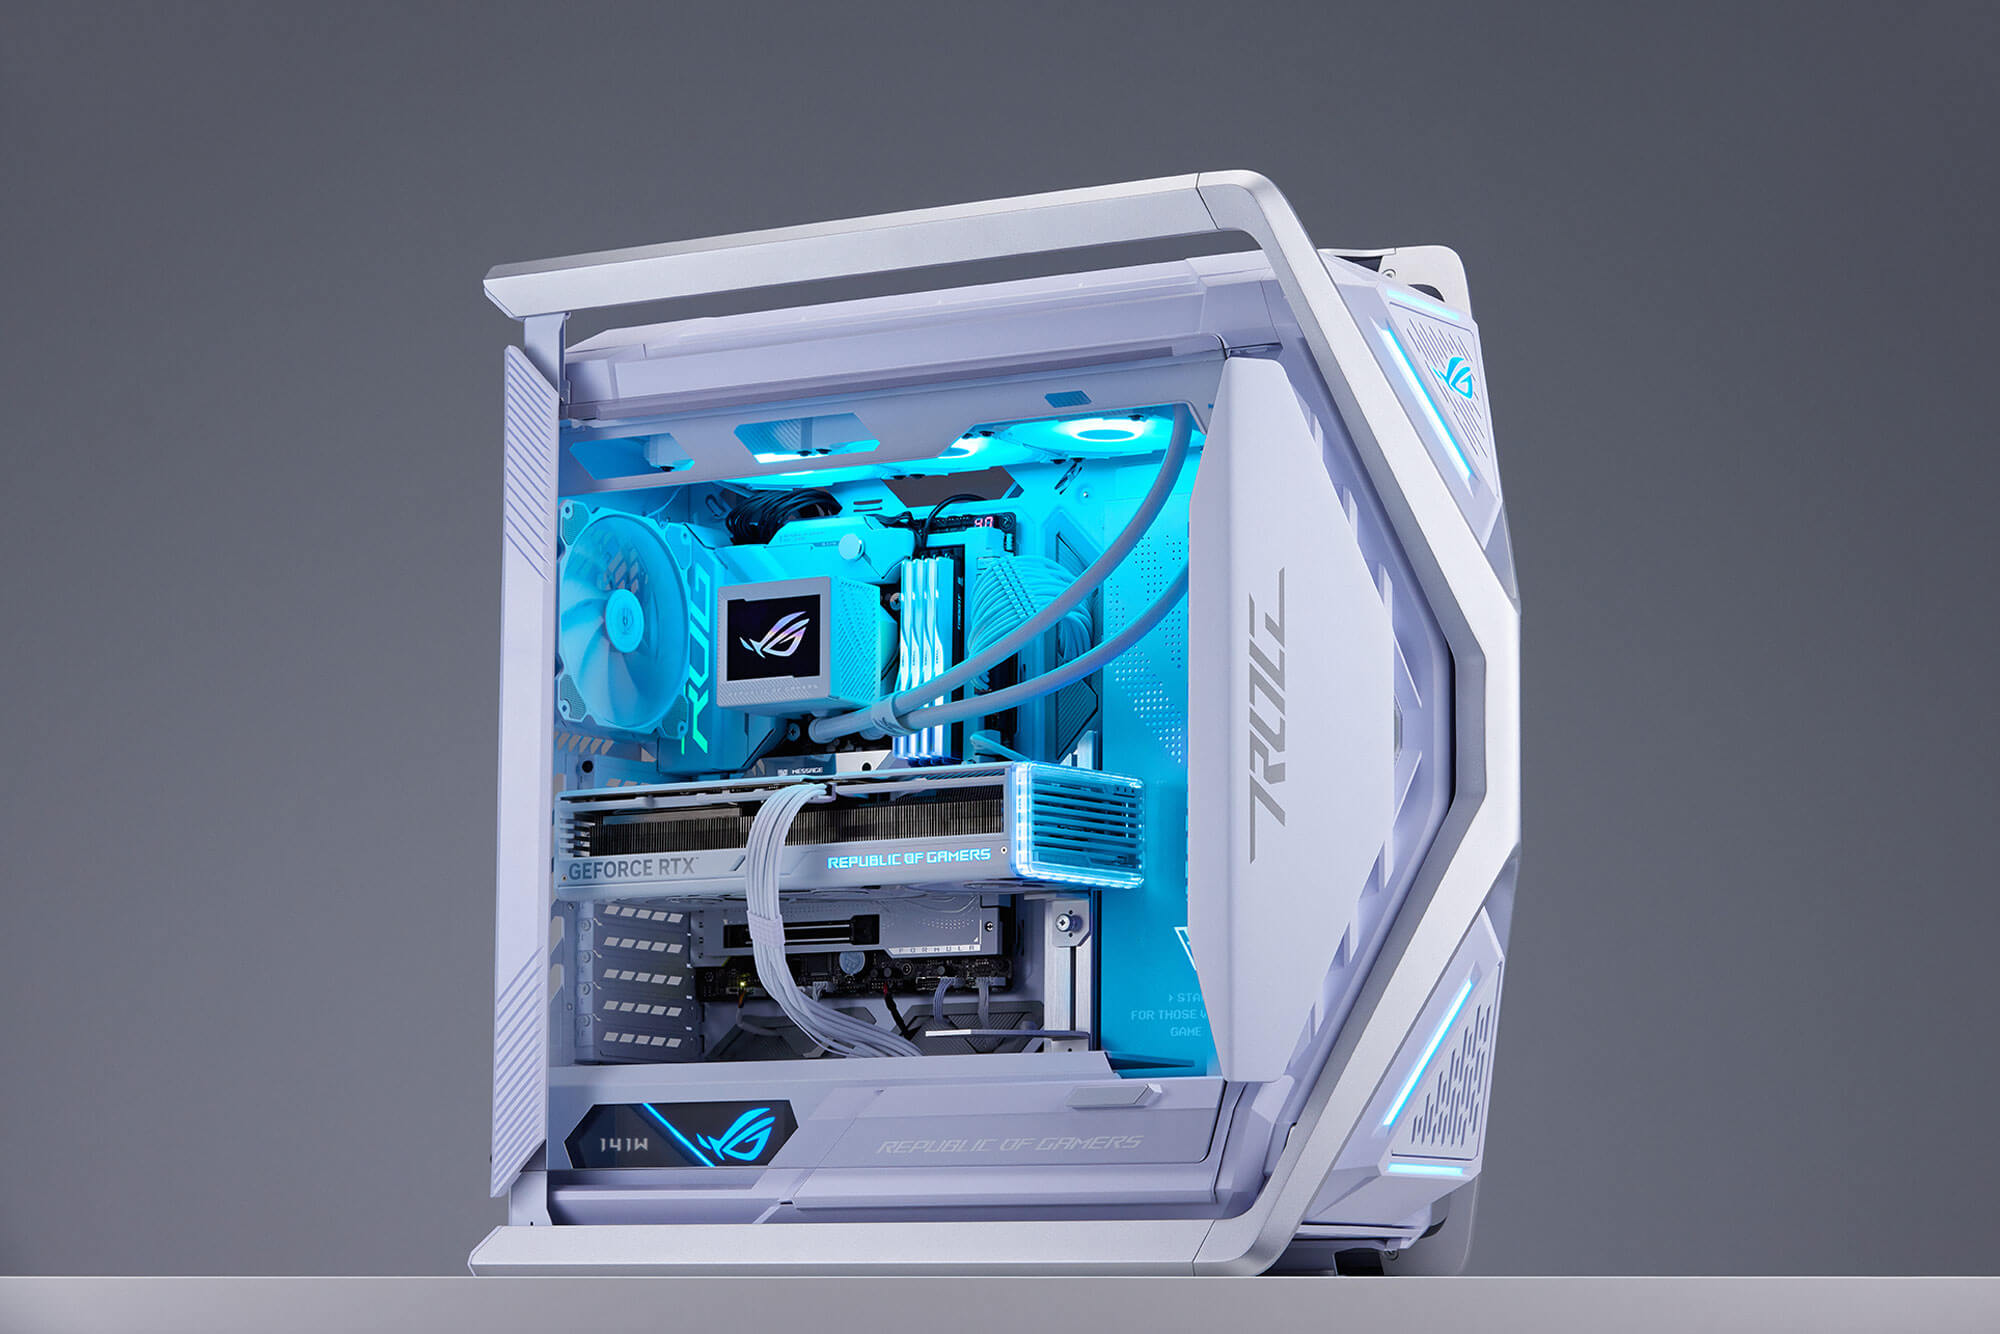 Front view photo of the Frozen Throne PC build